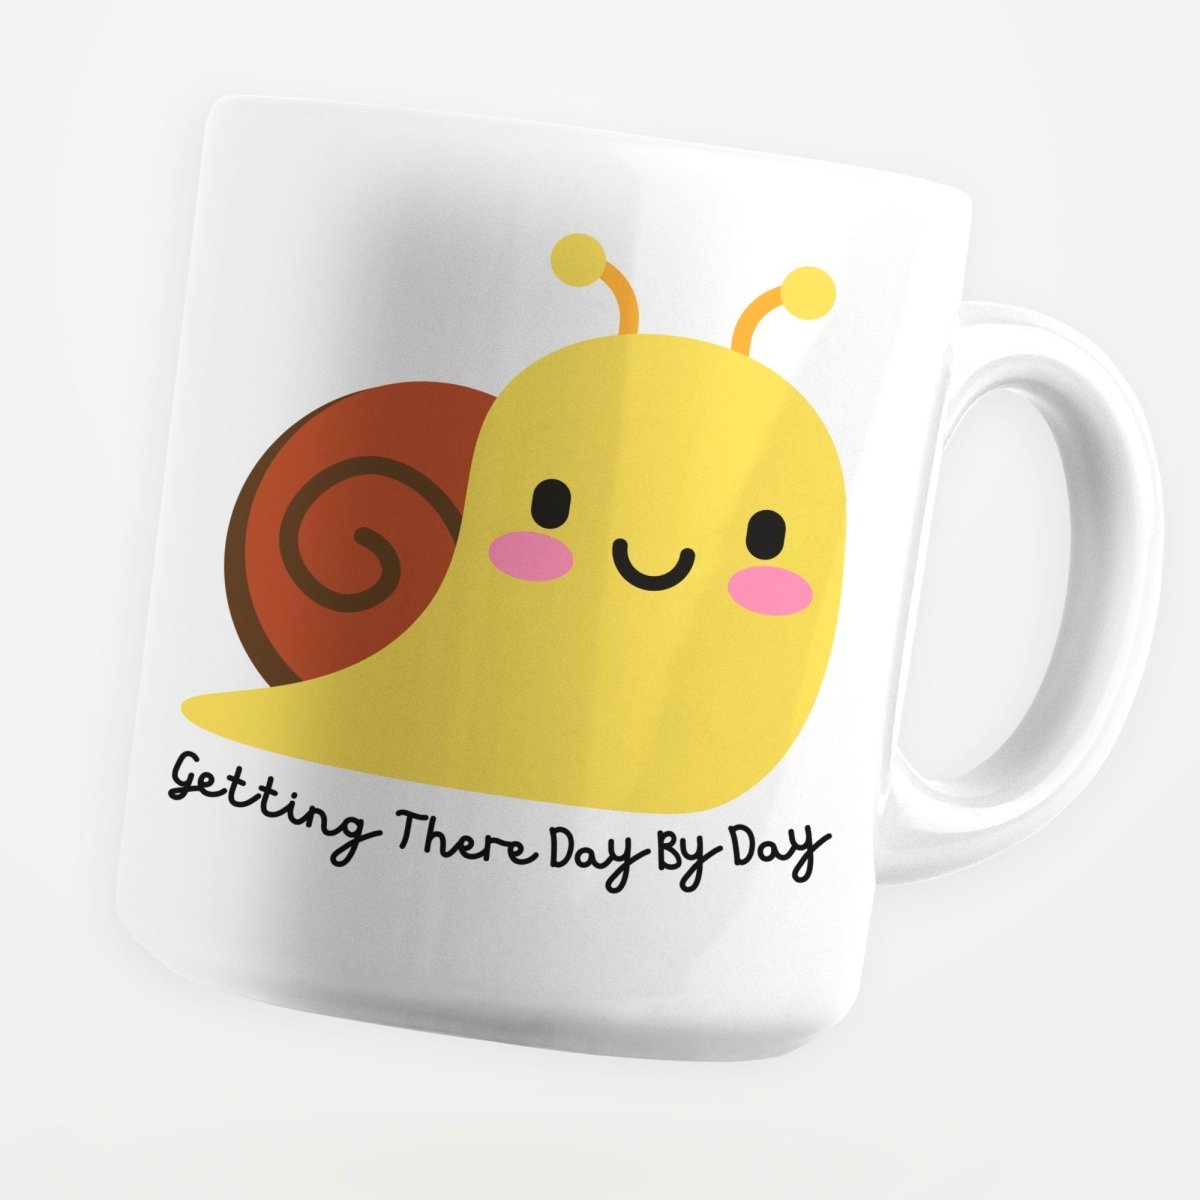 Getting There Day By Day 11oz Coffee Mug - stickerbullGetting There Day By Day 11oz Coffee MugMugsstickerbullstickerbullMug_GettingThereDayByDayGetting There Day By Day 11oz Coffee Mug